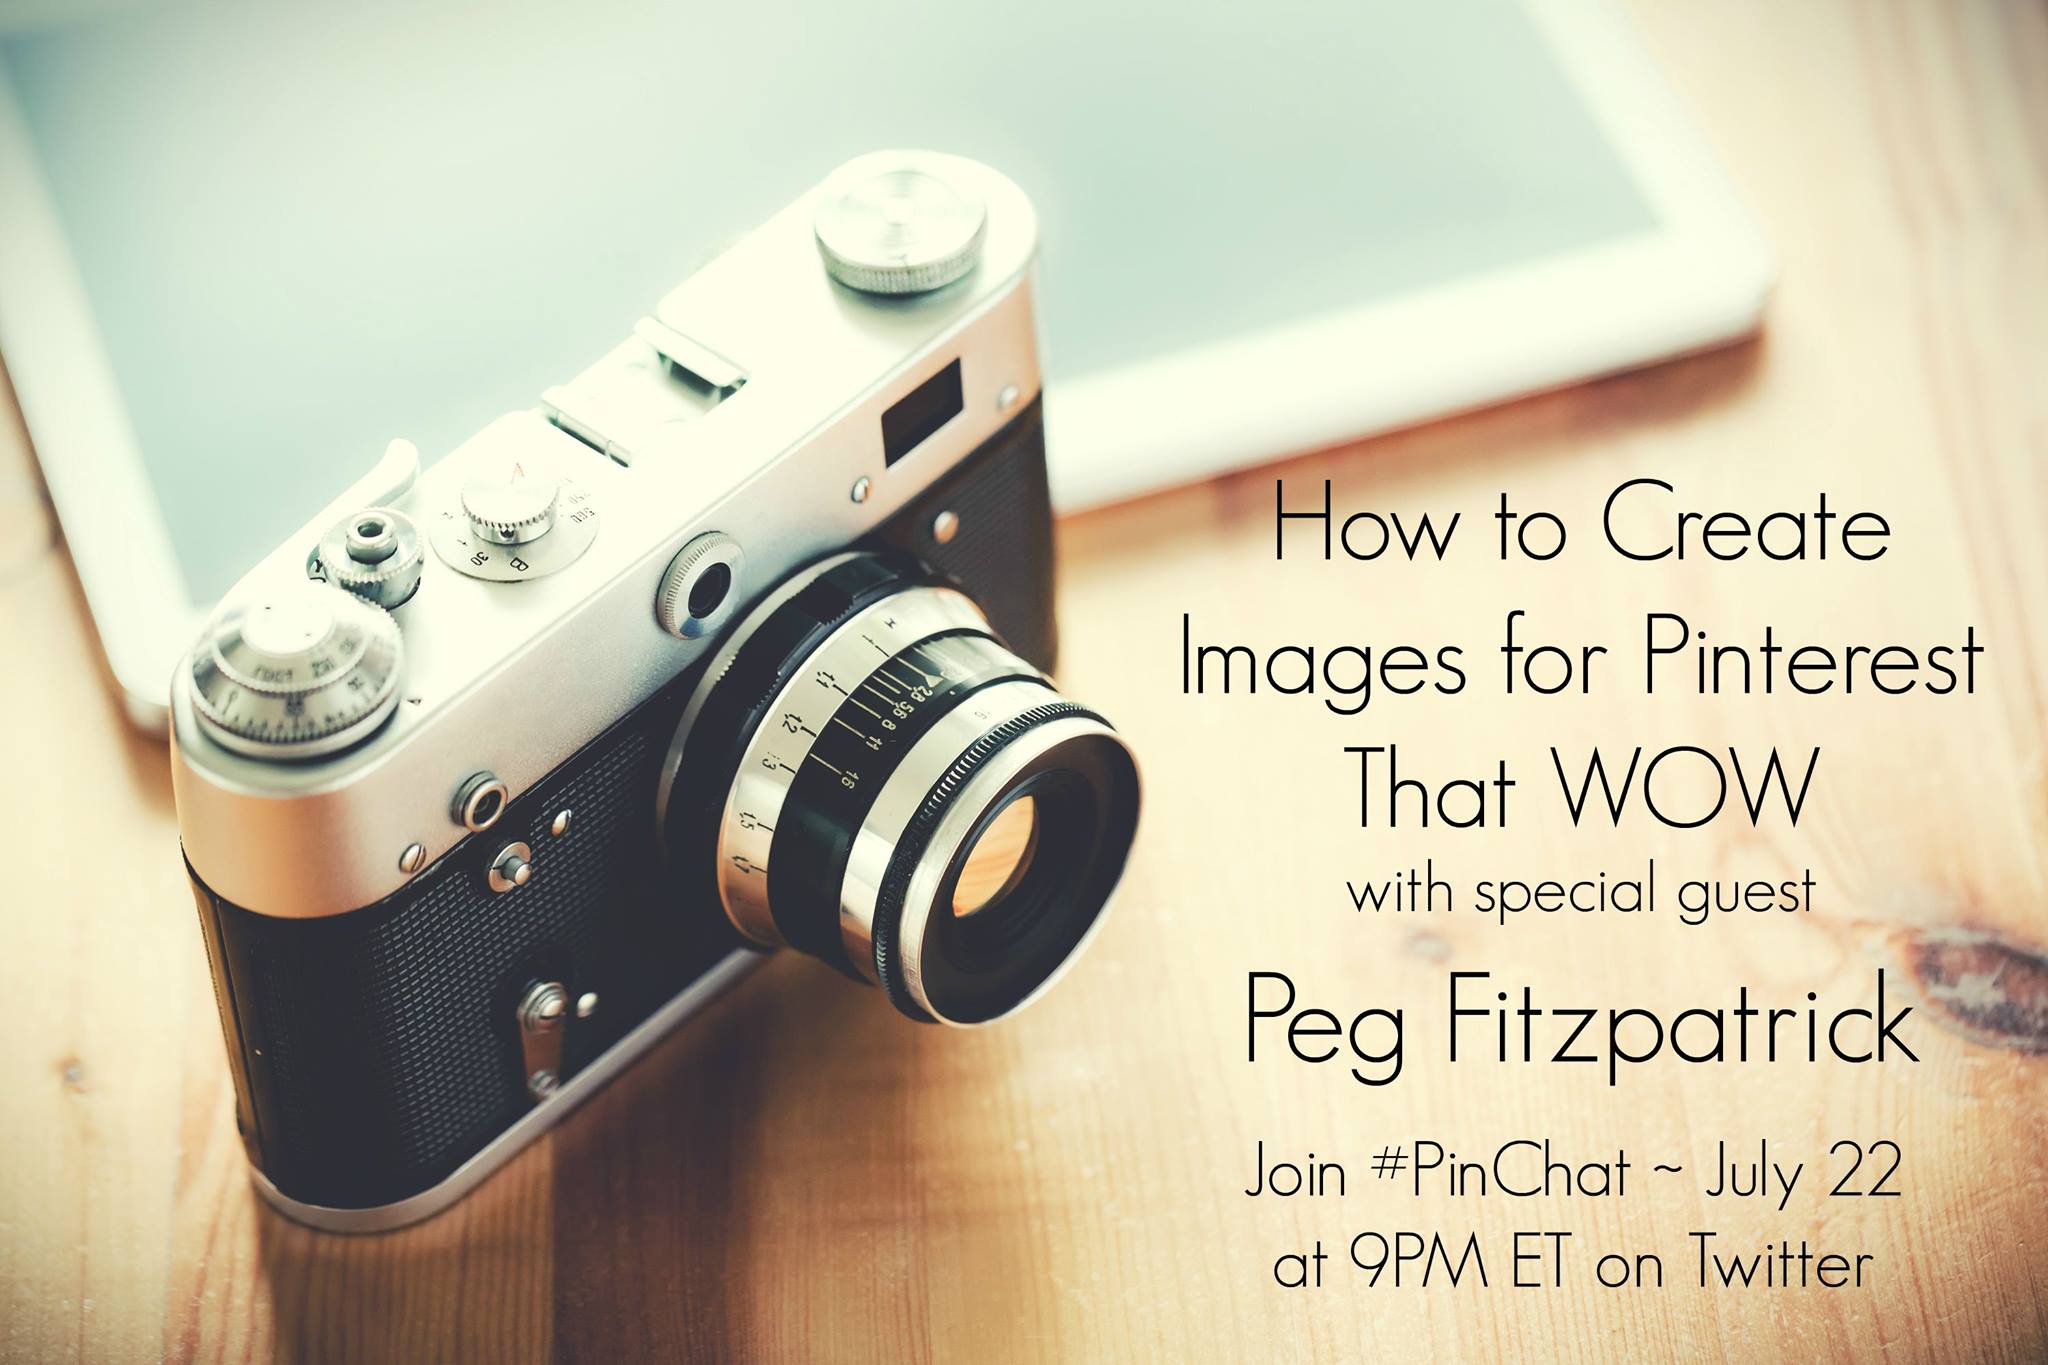 How to Create Images for Pinterest that WOW at #PInChat  